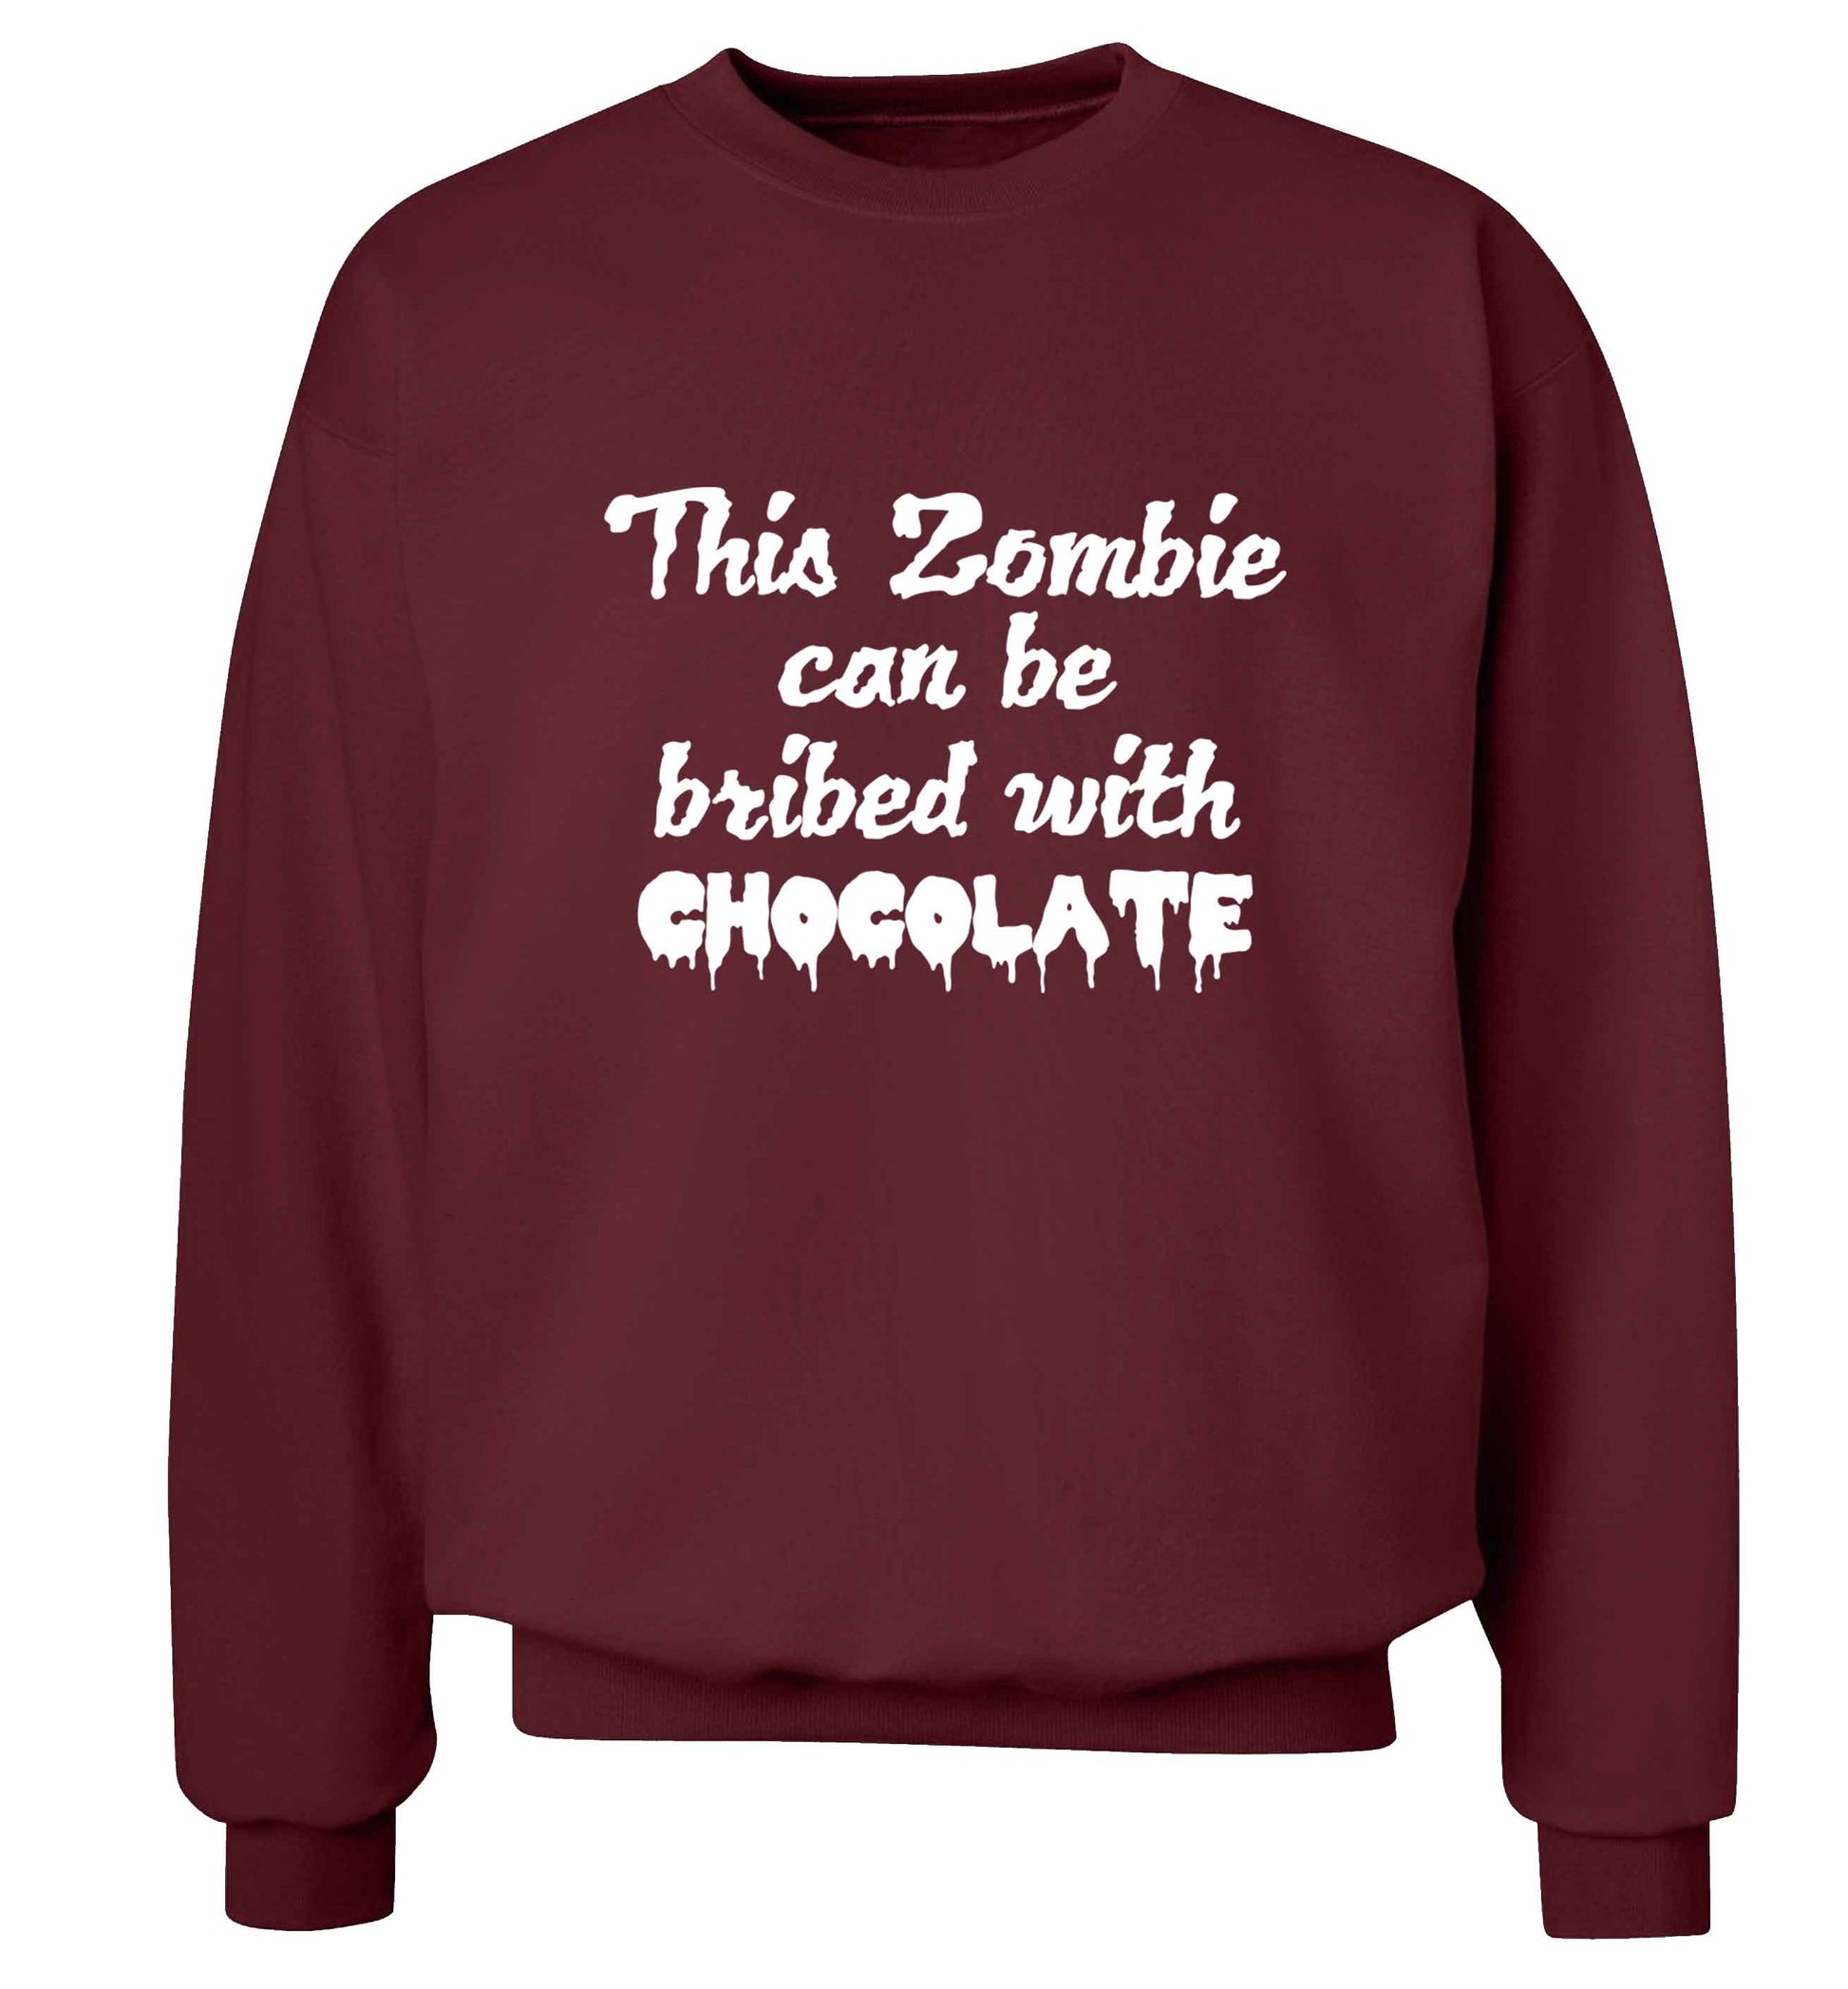 This zombie can be bribed with chocolate adult's unisex maroon sweater 2XL